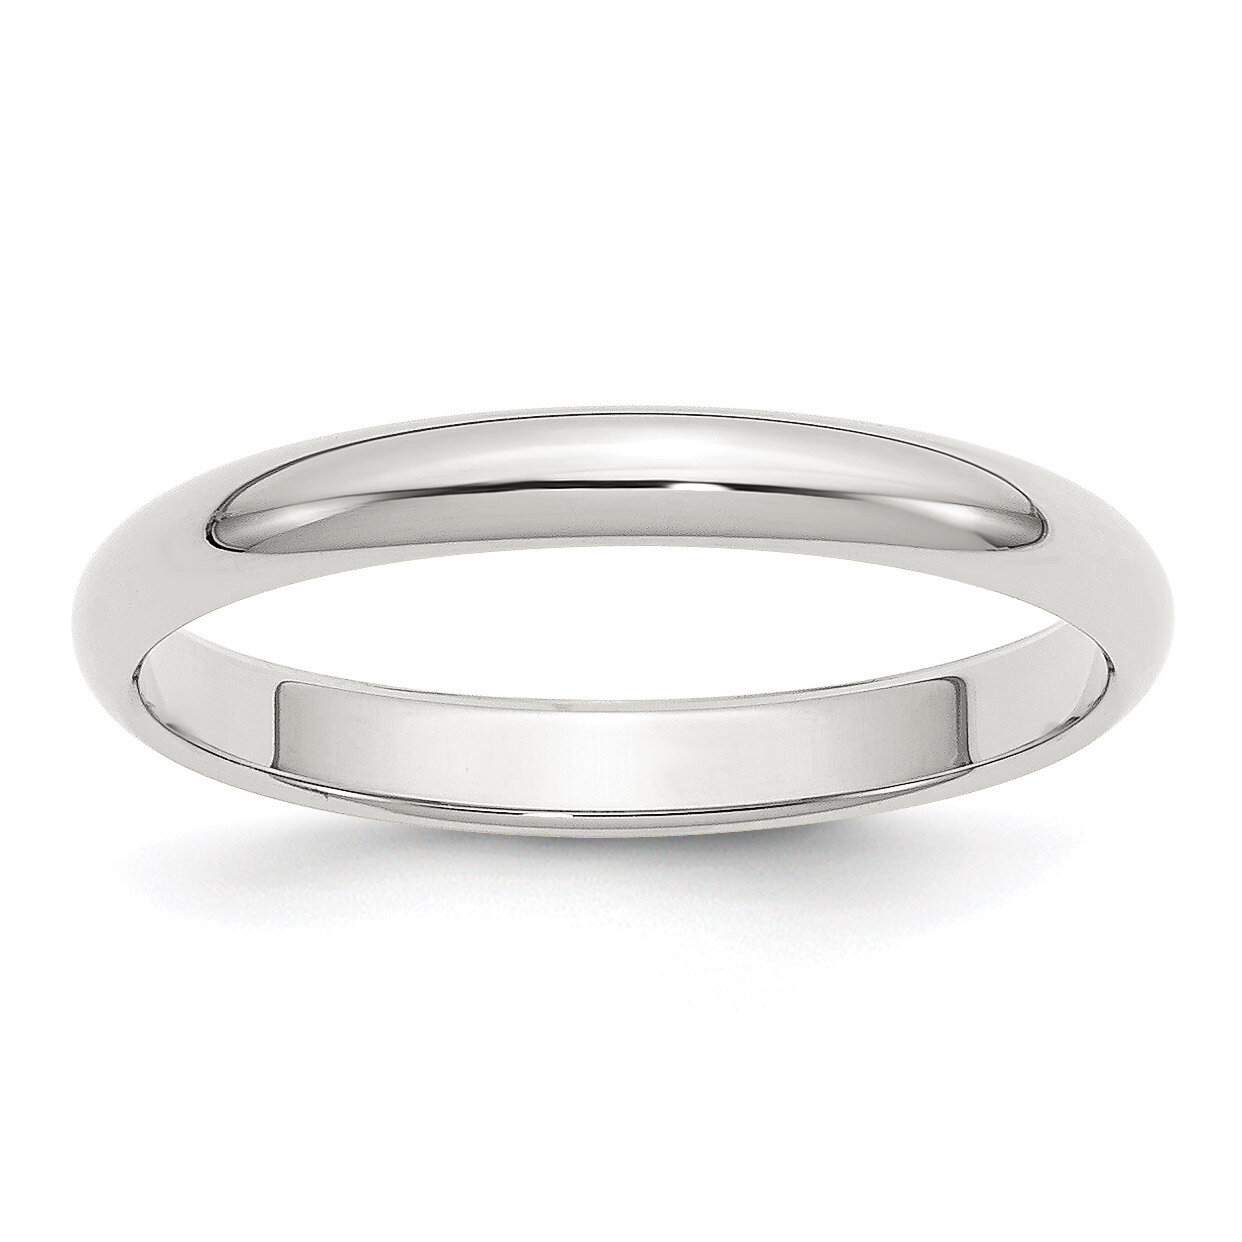 Stackable Expressions 3mm Half-Round Band - Sterling Silver QWH030